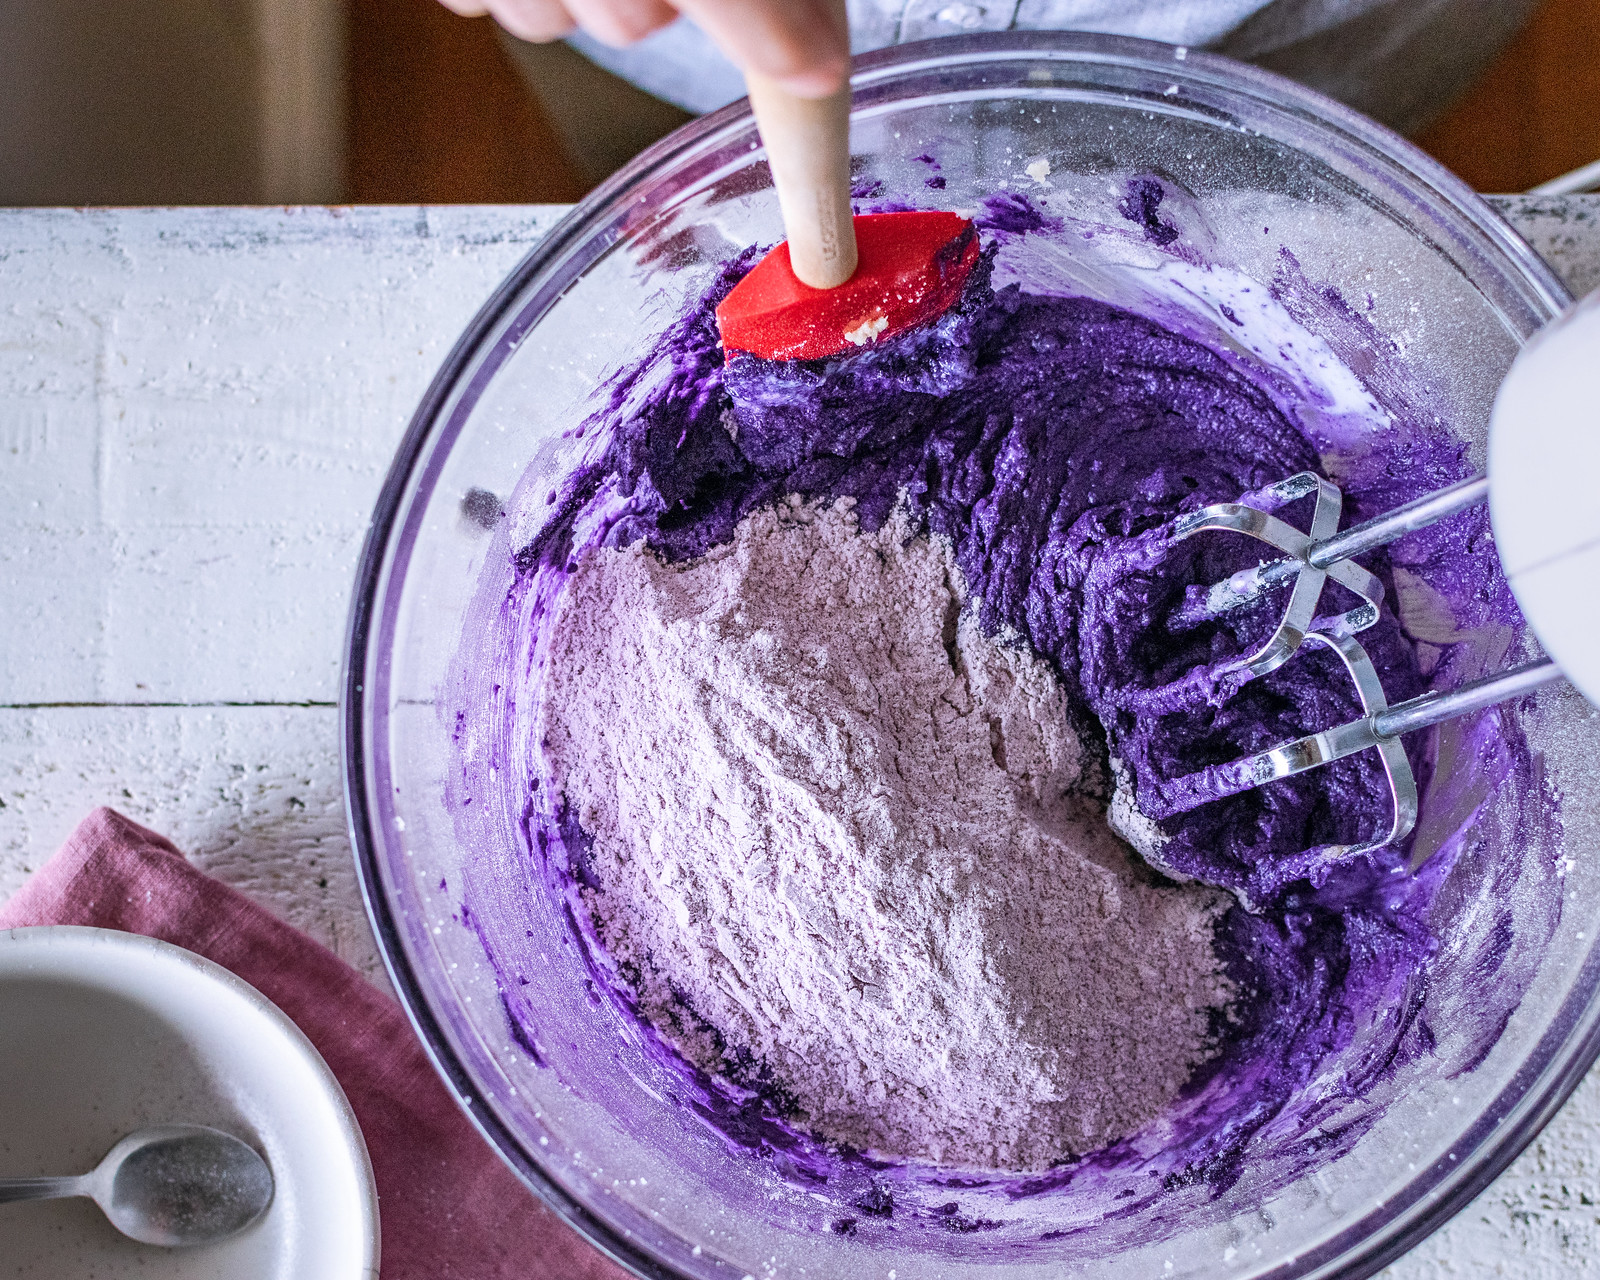 with both ube powder and ube extract, these cakes are bursting with ube flavor